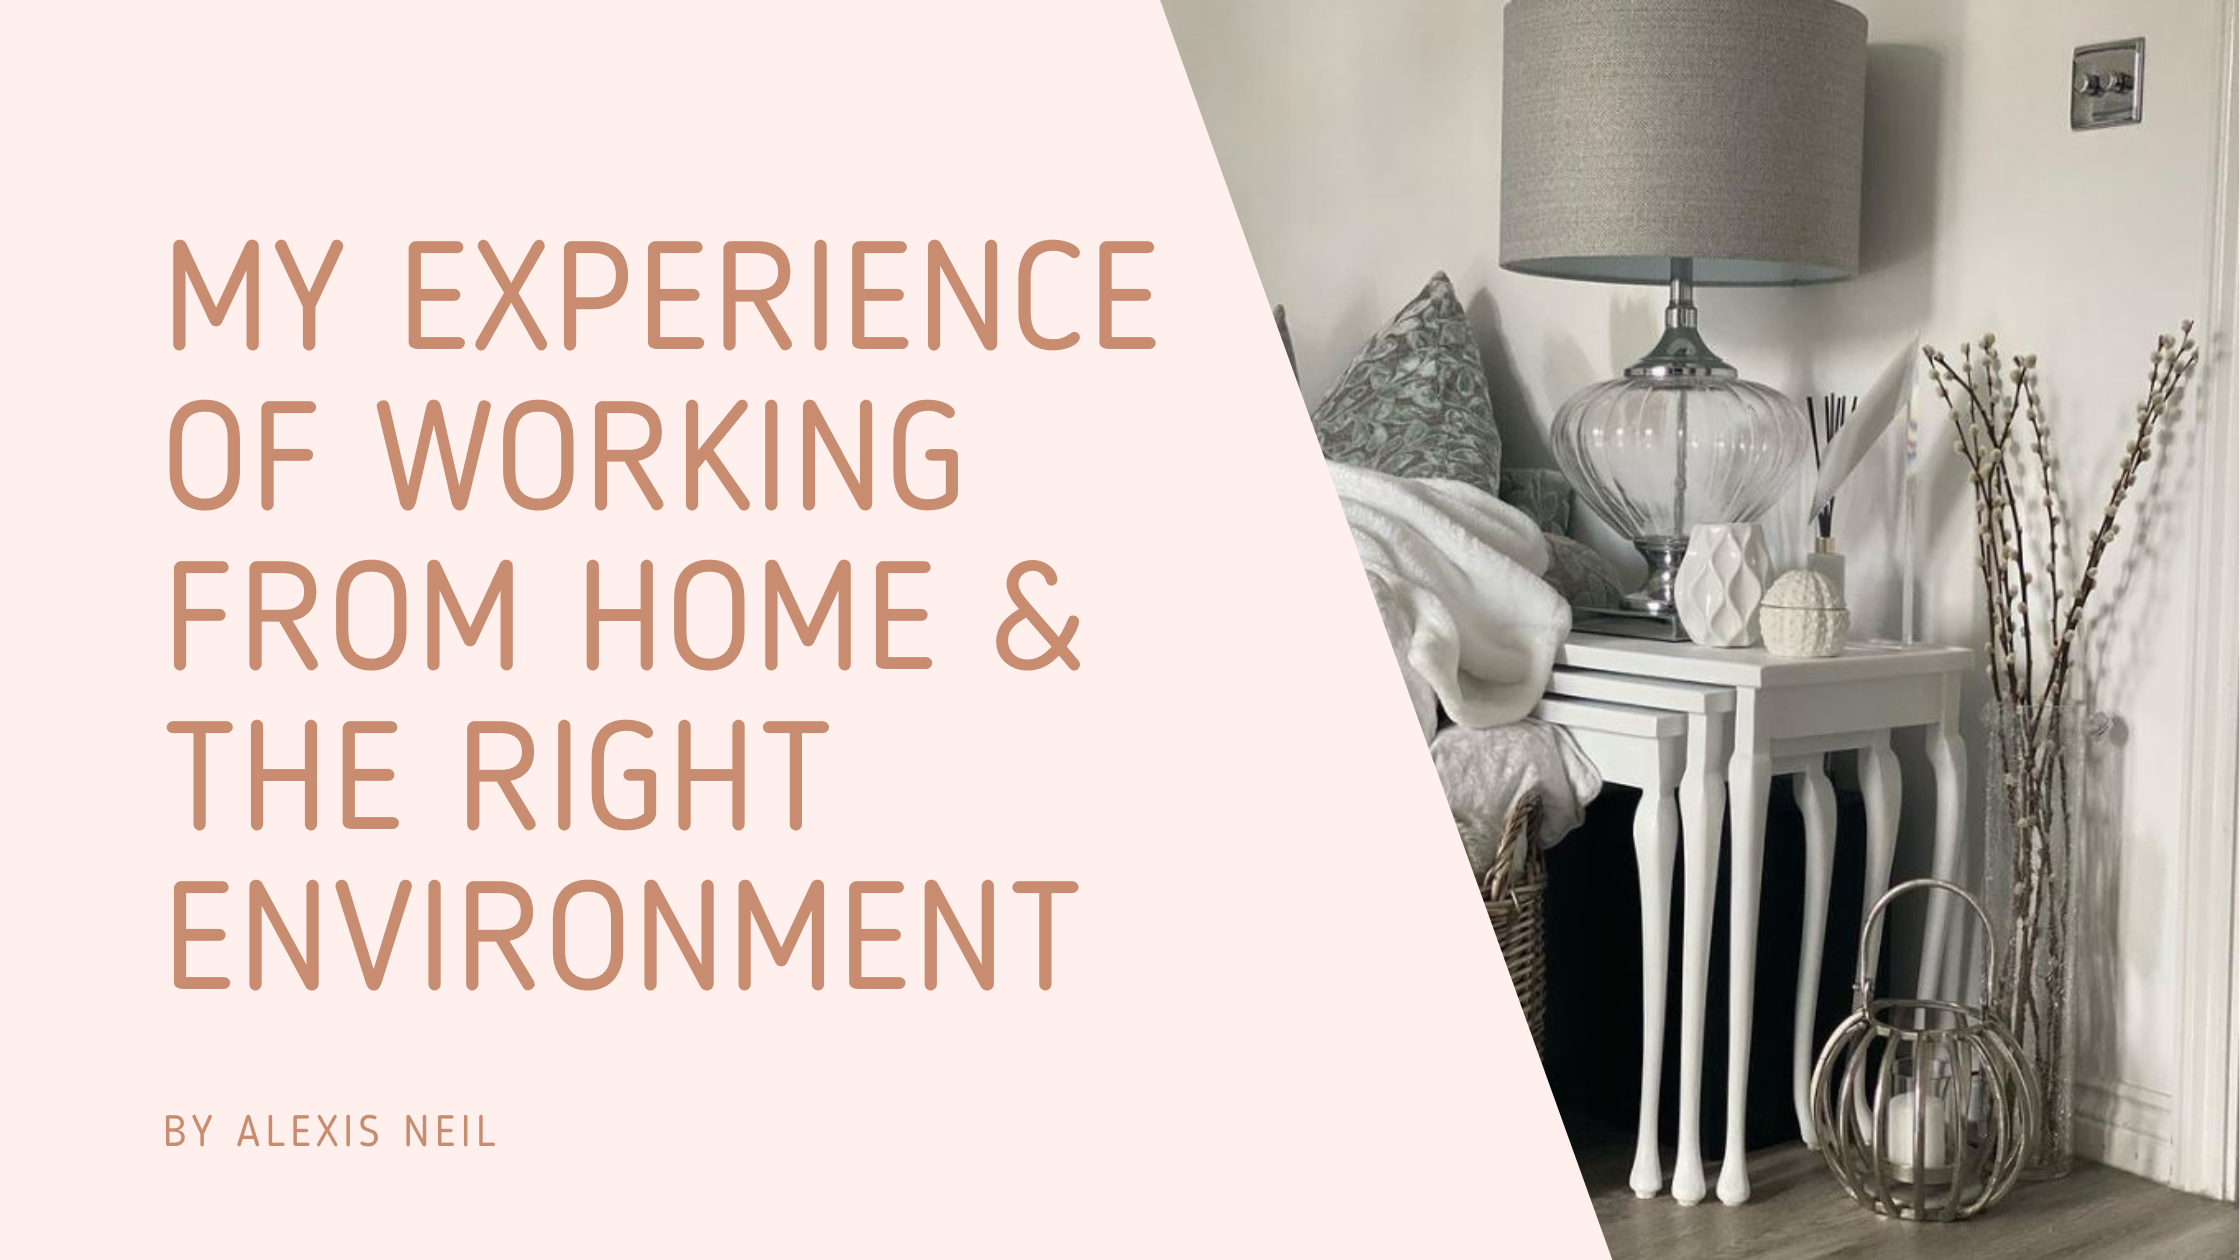 My experience of working from home and the right environment - Alexis Neil